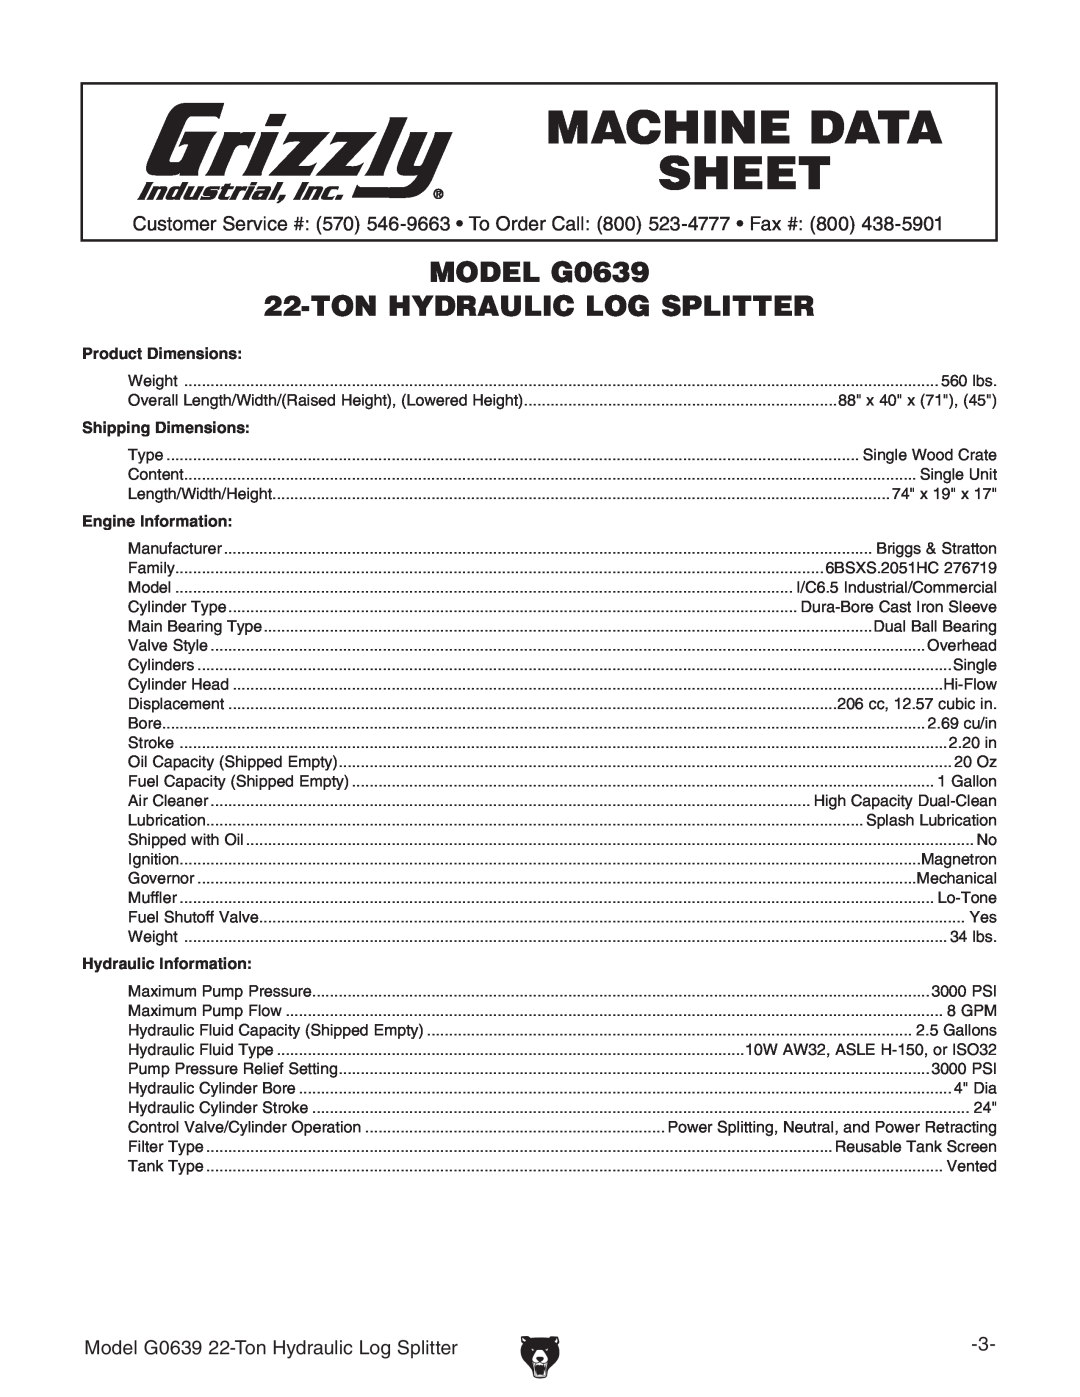 Grizzly Machine Data Sheet, MODEL G0639, Ton Hydraulic Log Splitter, Product Dimensions, Shipping Dimensions 